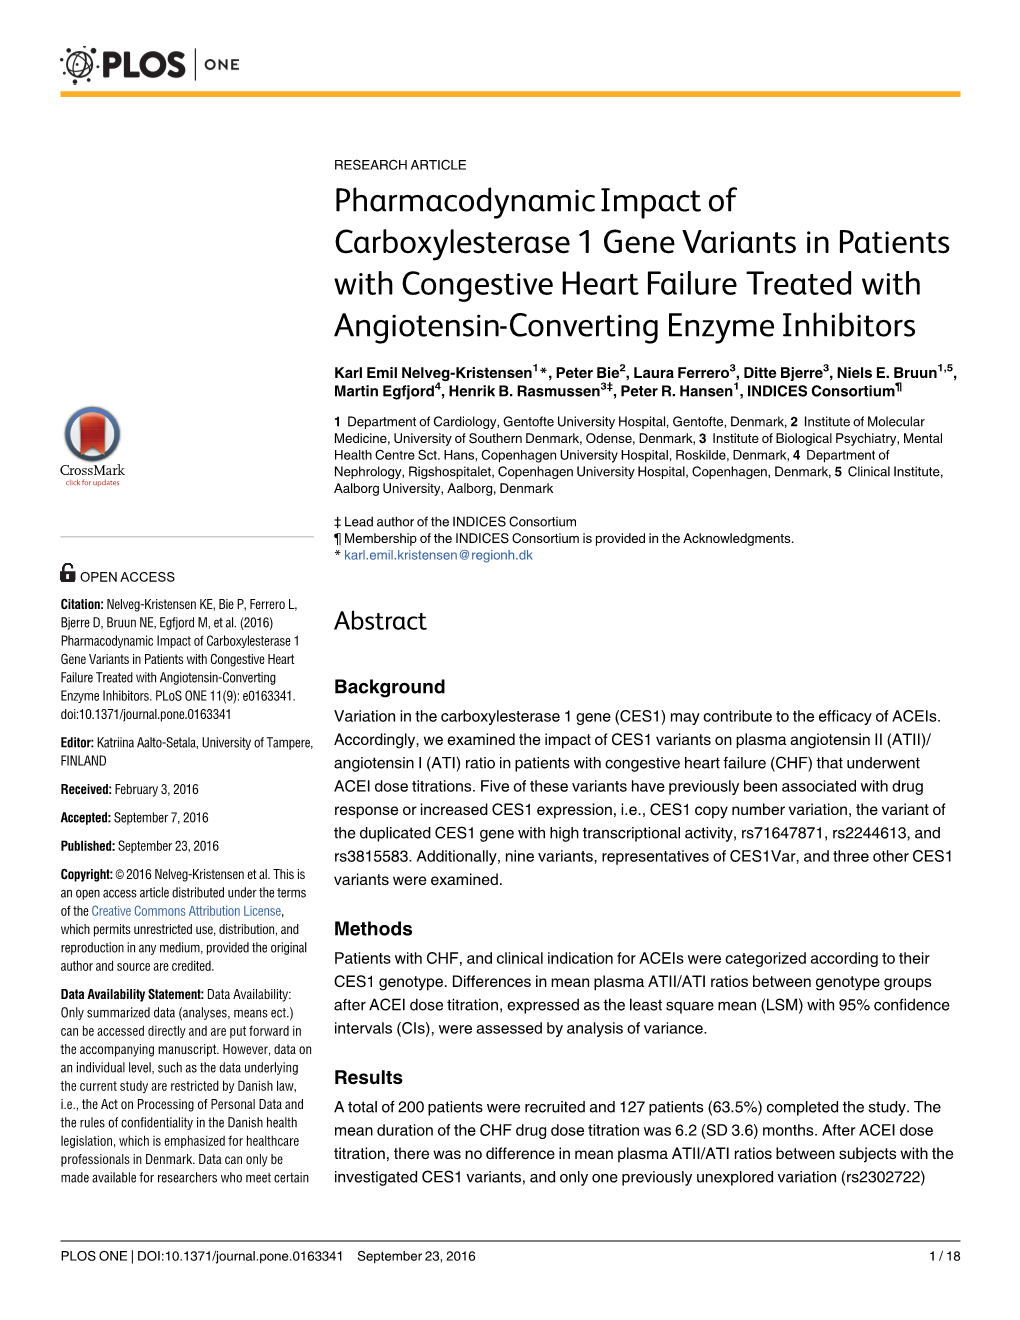 Pharmacodynamic Impact of Carboxylesterase 1 Gene Variants in Patients with Congestive Heart Failure Treated with Angiotensin-Converting Enzyme Inhibitors